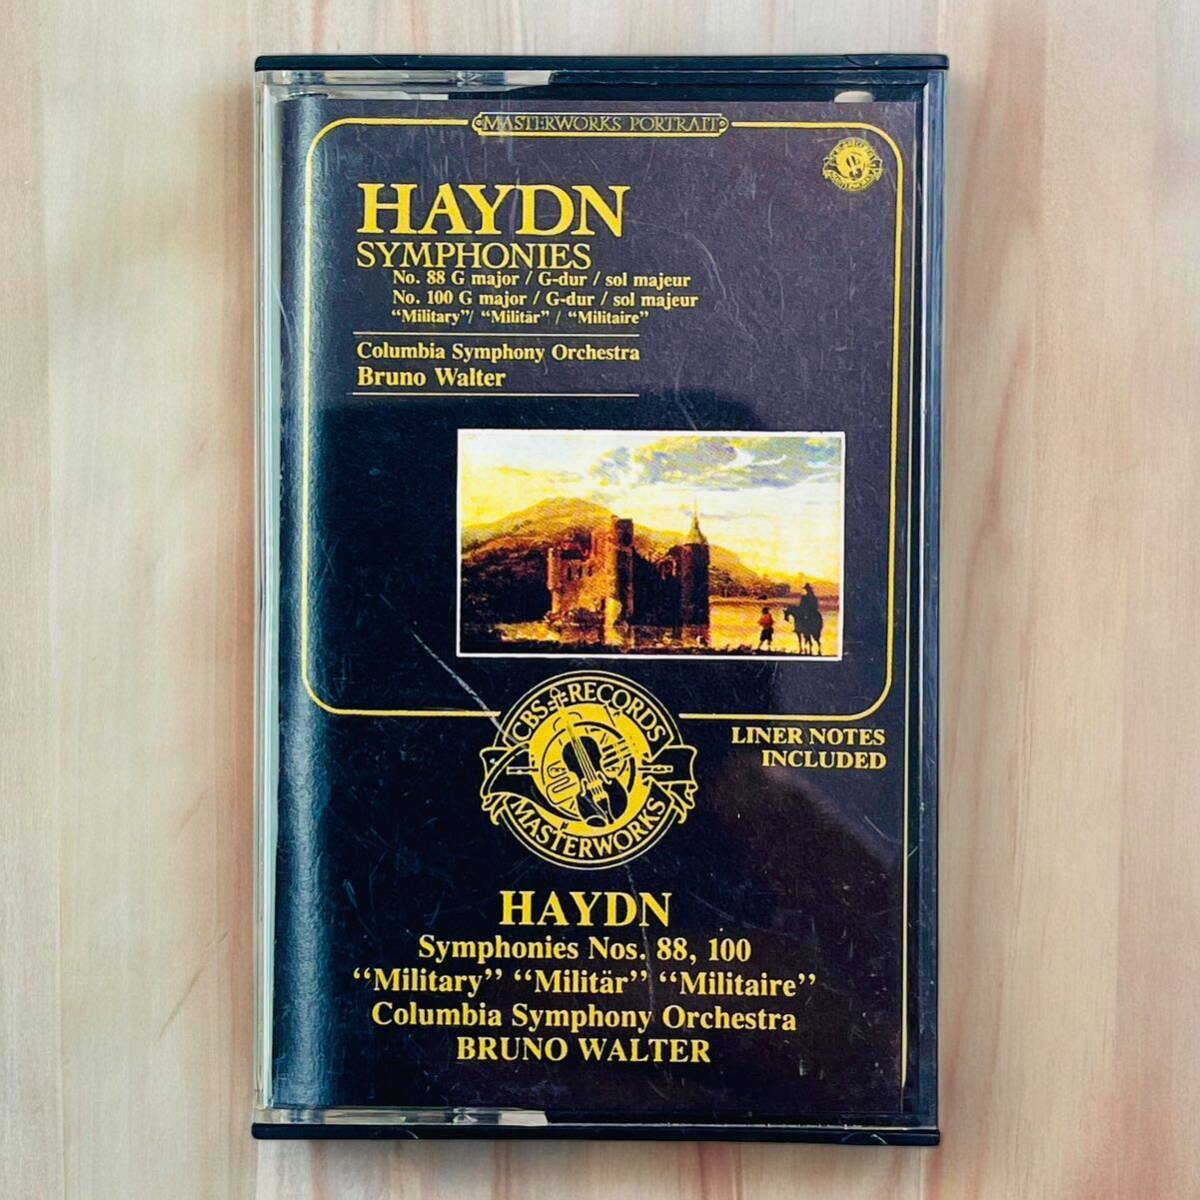 HAYDN SYMPHONIES hyde n symphony symphony no. 88 number / no. 100 number Classic cassette tape 